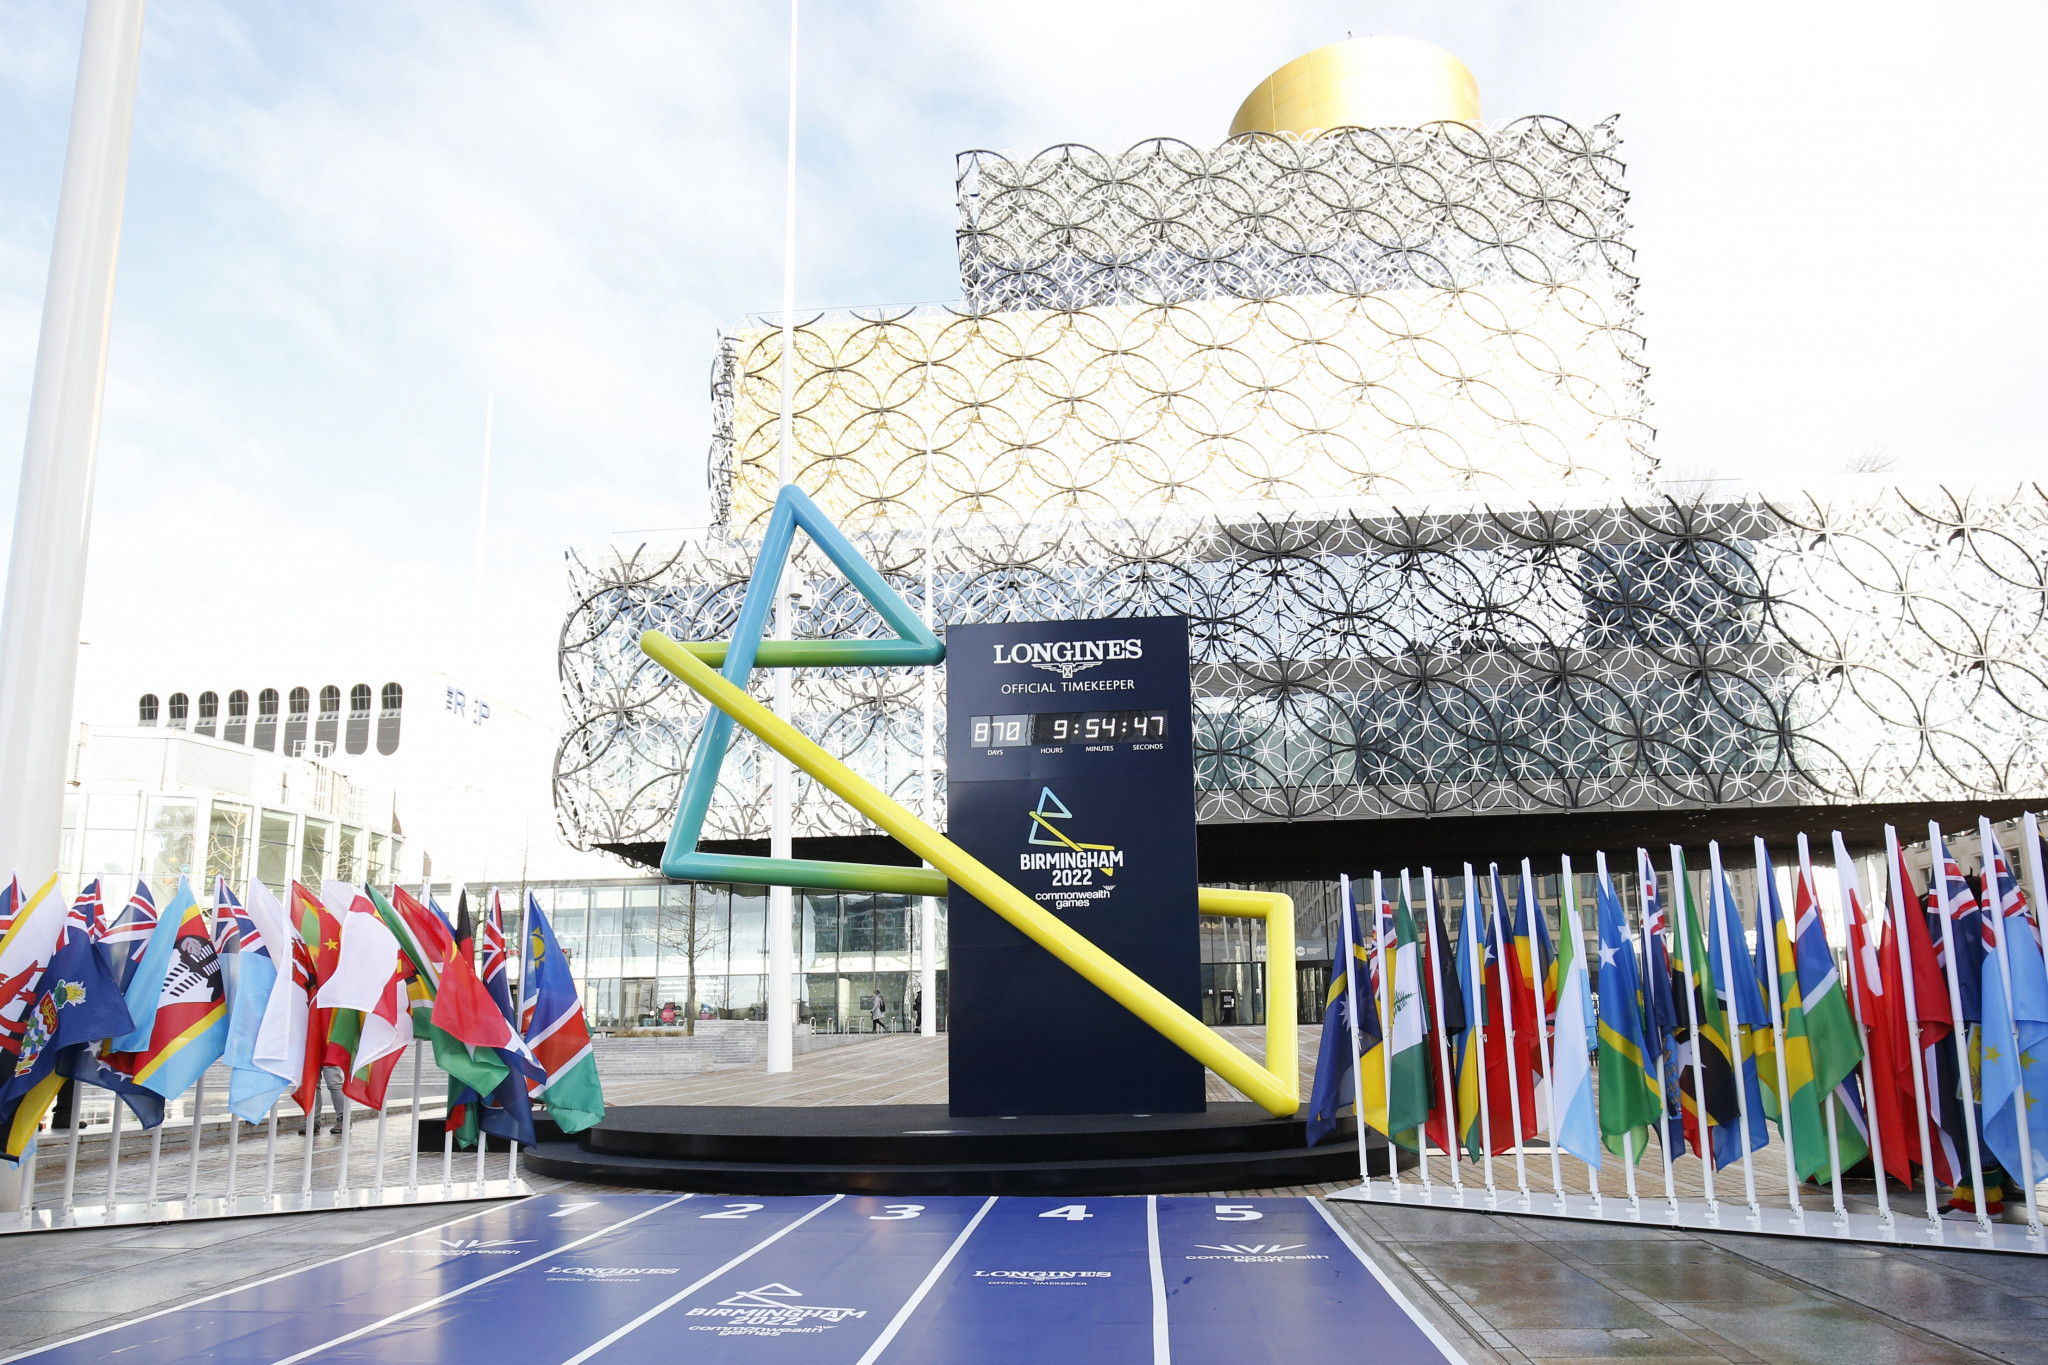 Andy Street says he believes the Birmingham 2022 Commonwealth Games will be an important part of helping the area's financial recovery from the coronavirus pandemic ©Getty Images